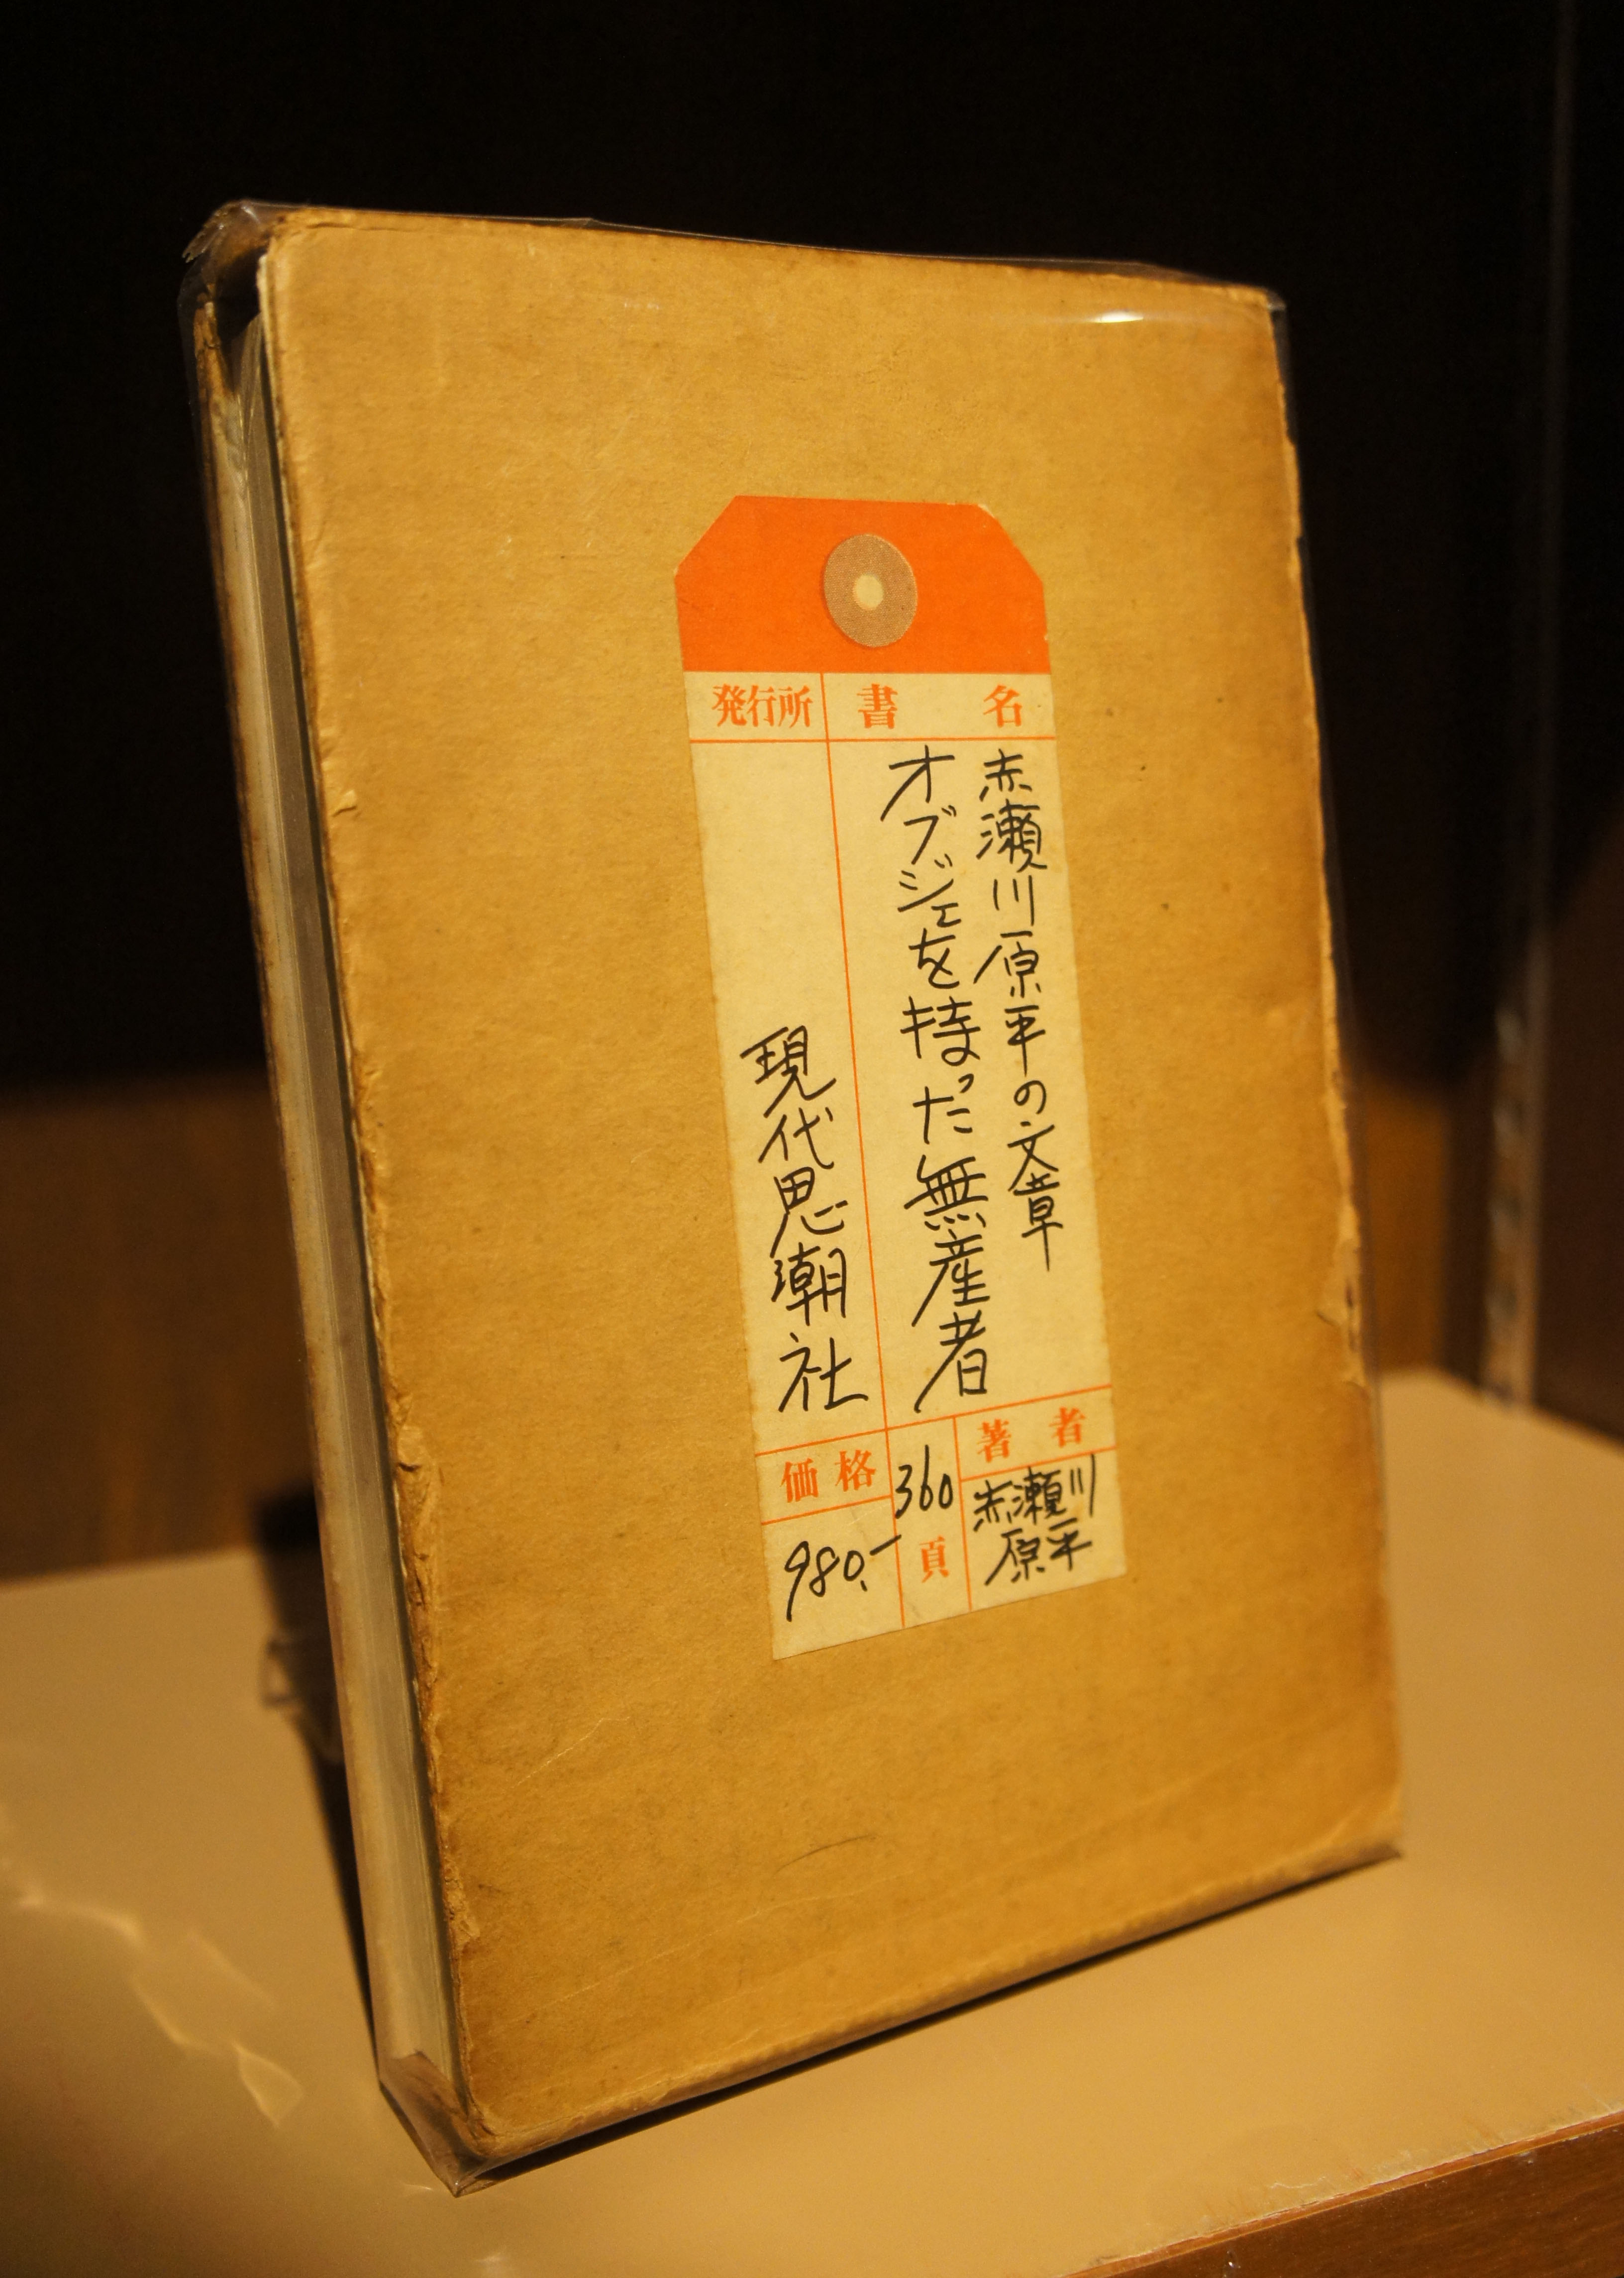 http://www.natsume-books.com/list_photo.php?id=192280